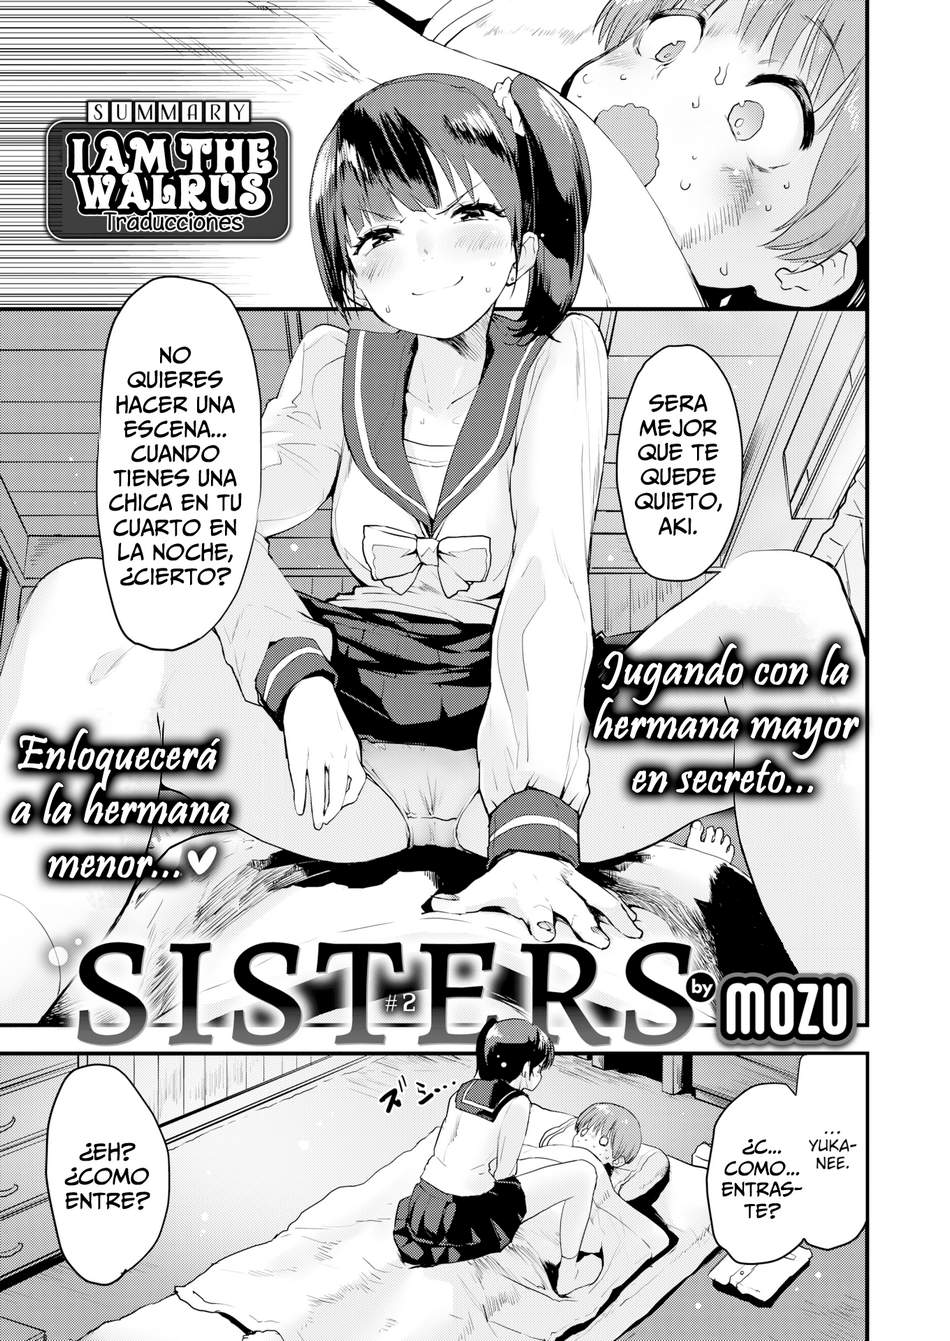 Sisters #2 - Page #1